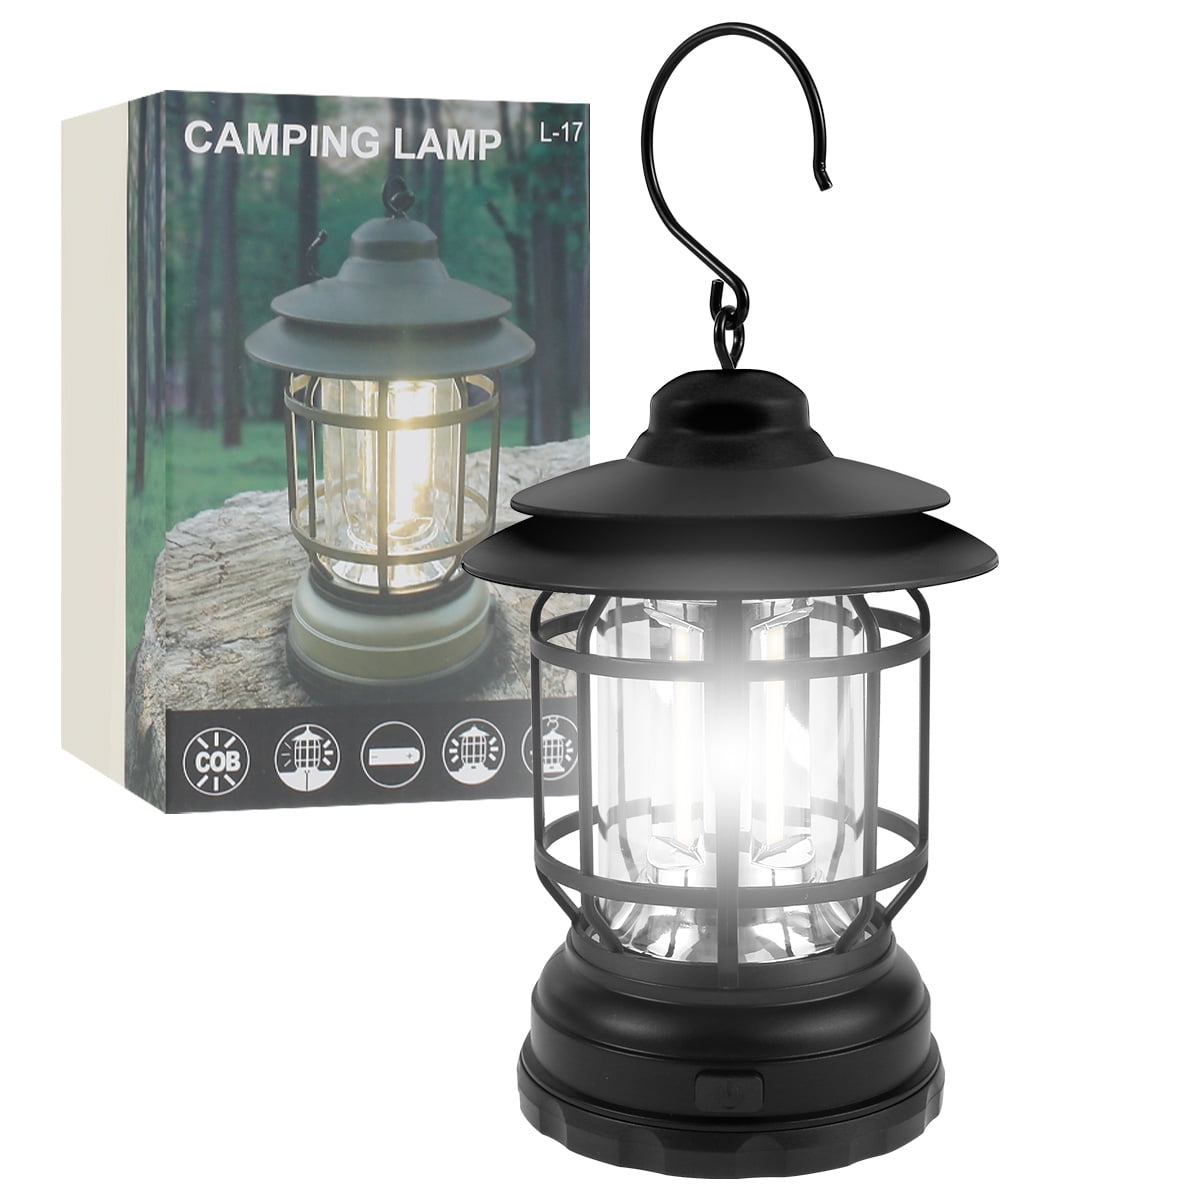 Mukkuri LED Camping Lantern with Bluetooth Speaker,Rechargeable Retro Camping Light,Battery Powered Hanging Candle Lamp,Portable Waterpoor Outdoor